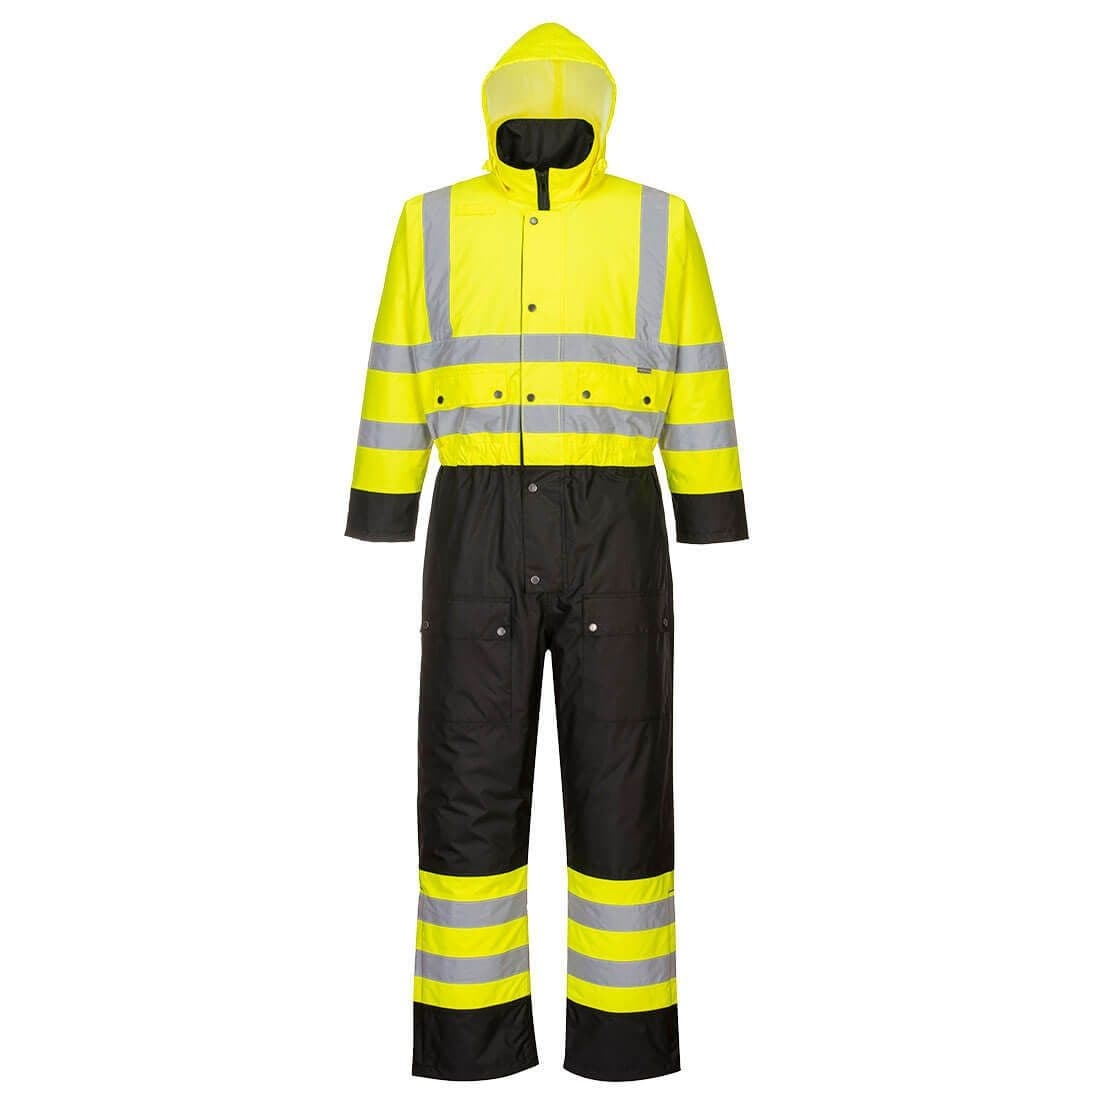 Portwest Hi-Vis Contrast Coverall – Lined – Yellow/Black – XL – Slip/Water Resistant – PPE – Taft Safety Store